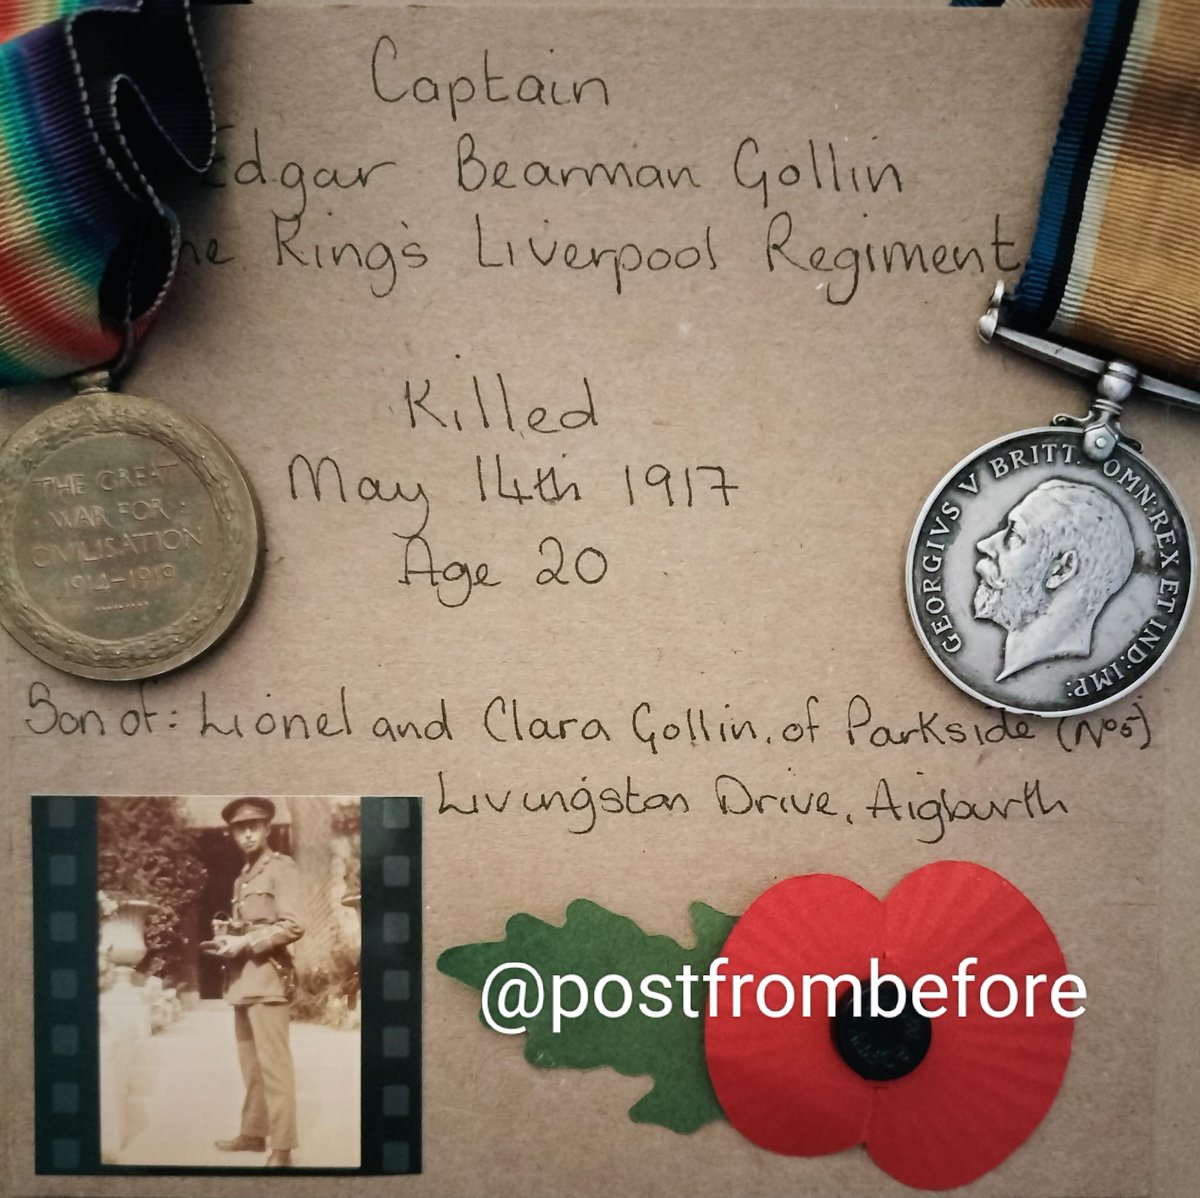 Remembering Captain Edgar Bearman Gollin of Parkside, Livingston Drive, Aigburth who died 14 May 1917 aged 20 #LestWeForget #housethroughtime, #oldliverpool, #aigburth